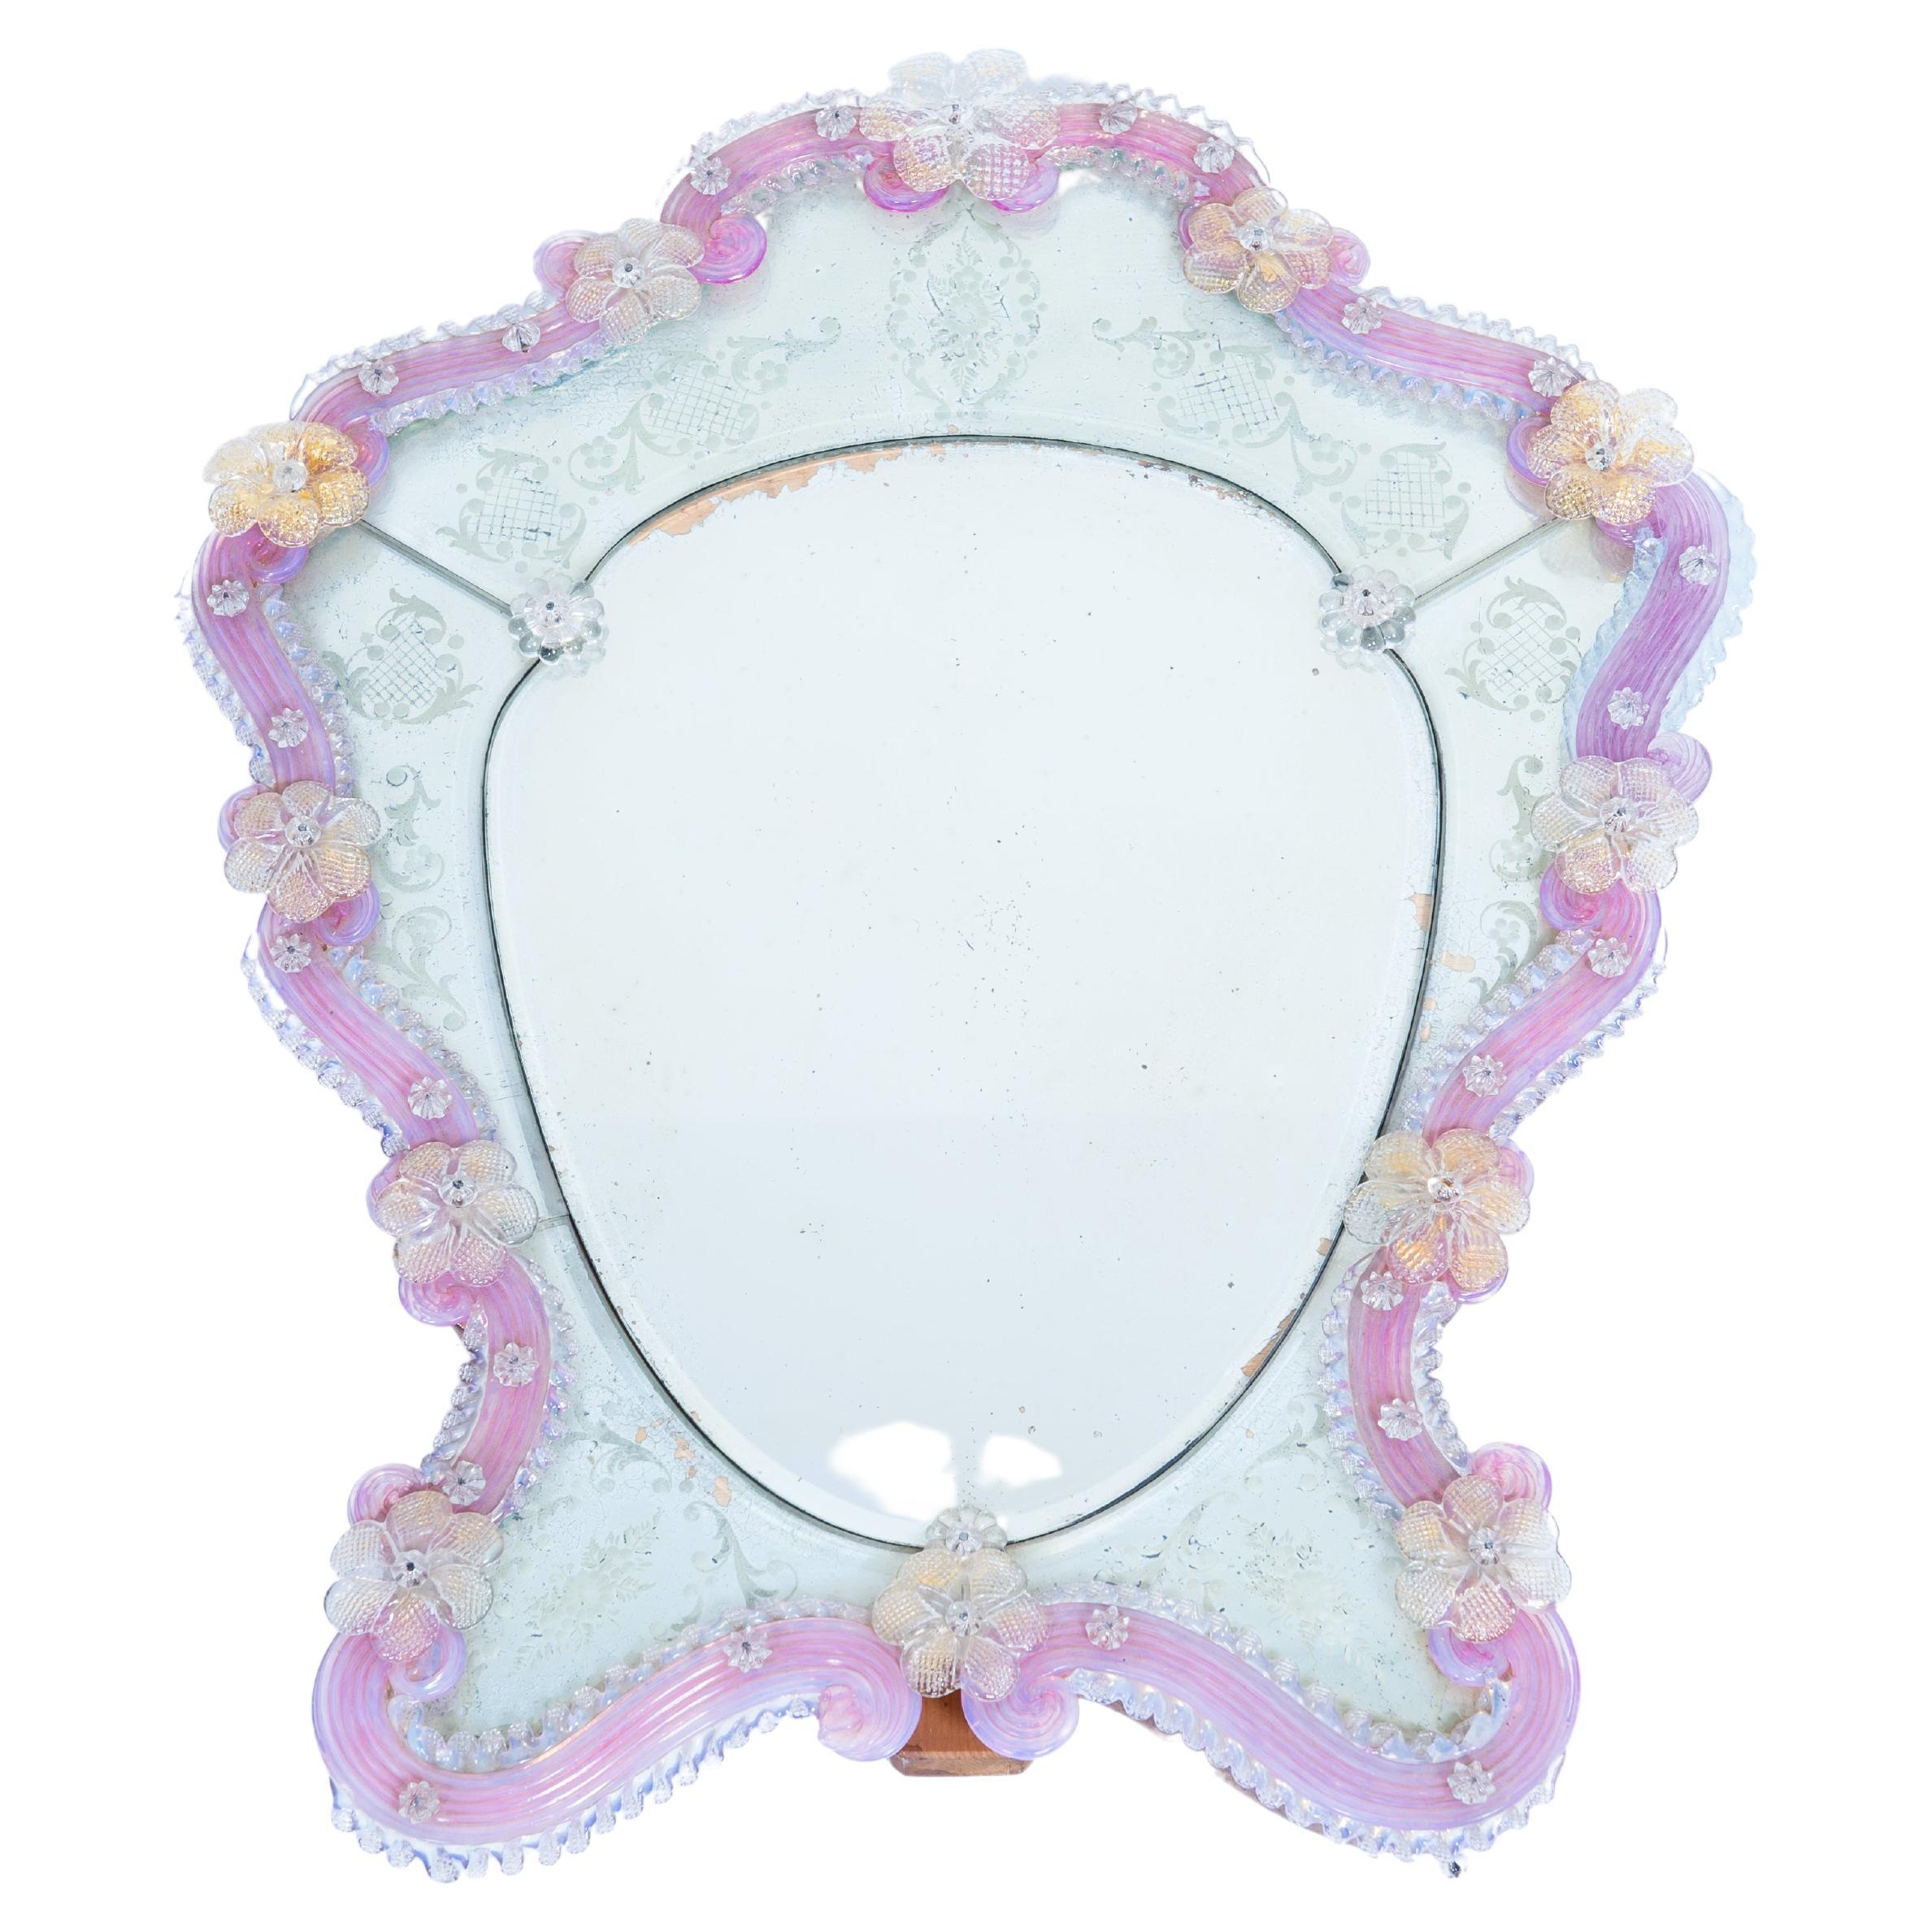 Murano Glass Table Mirror with Engravings and Pink Floral Decoration 1950s Italy